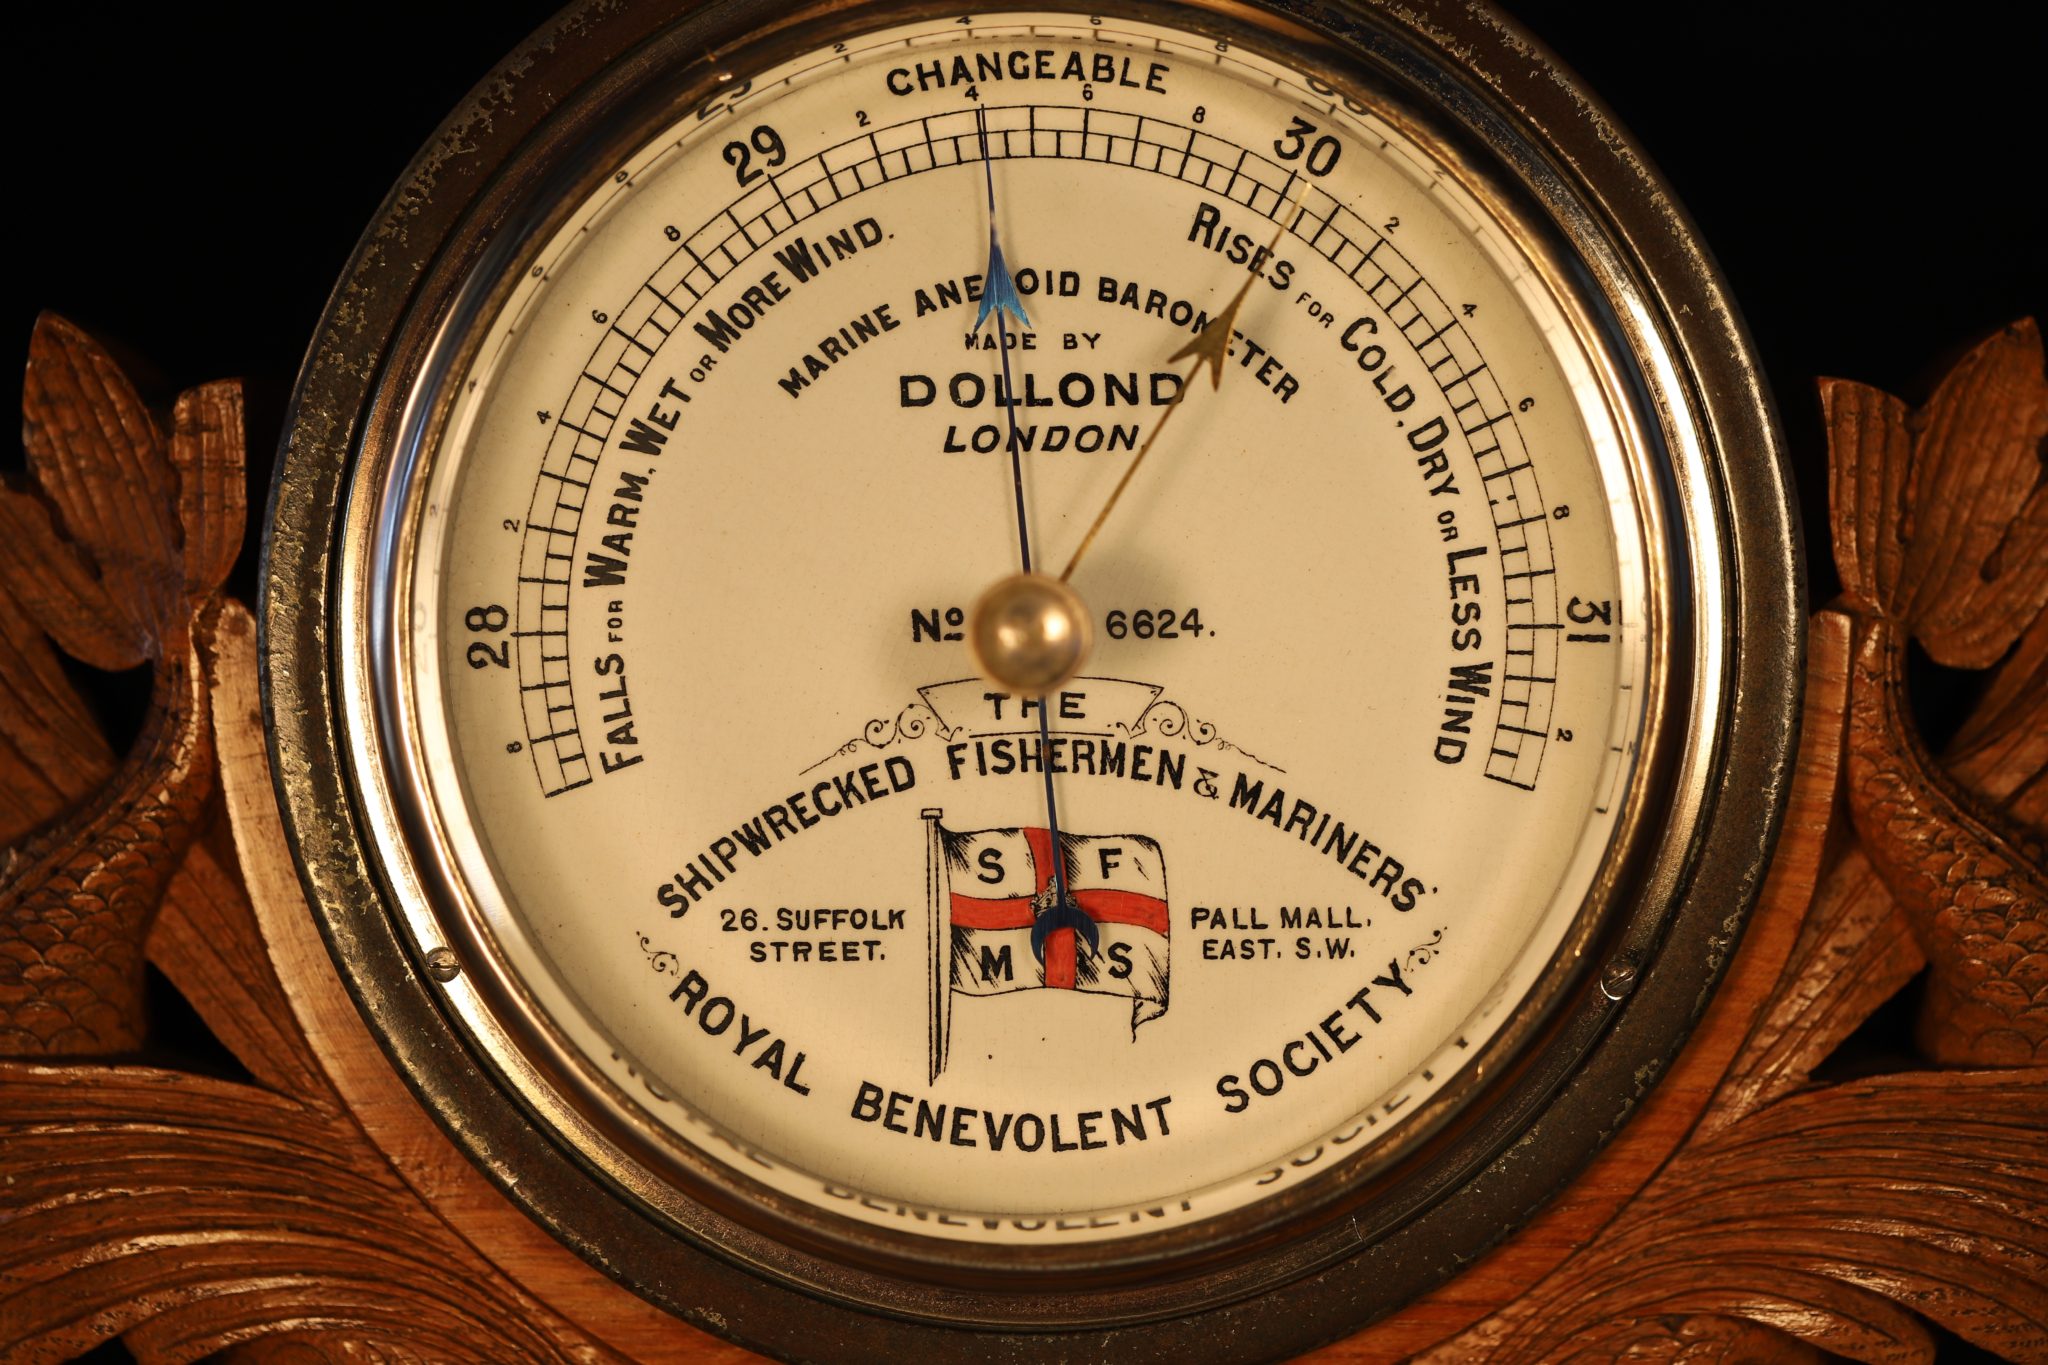 Image of Dollond Shipwrecked Barometer No 6624